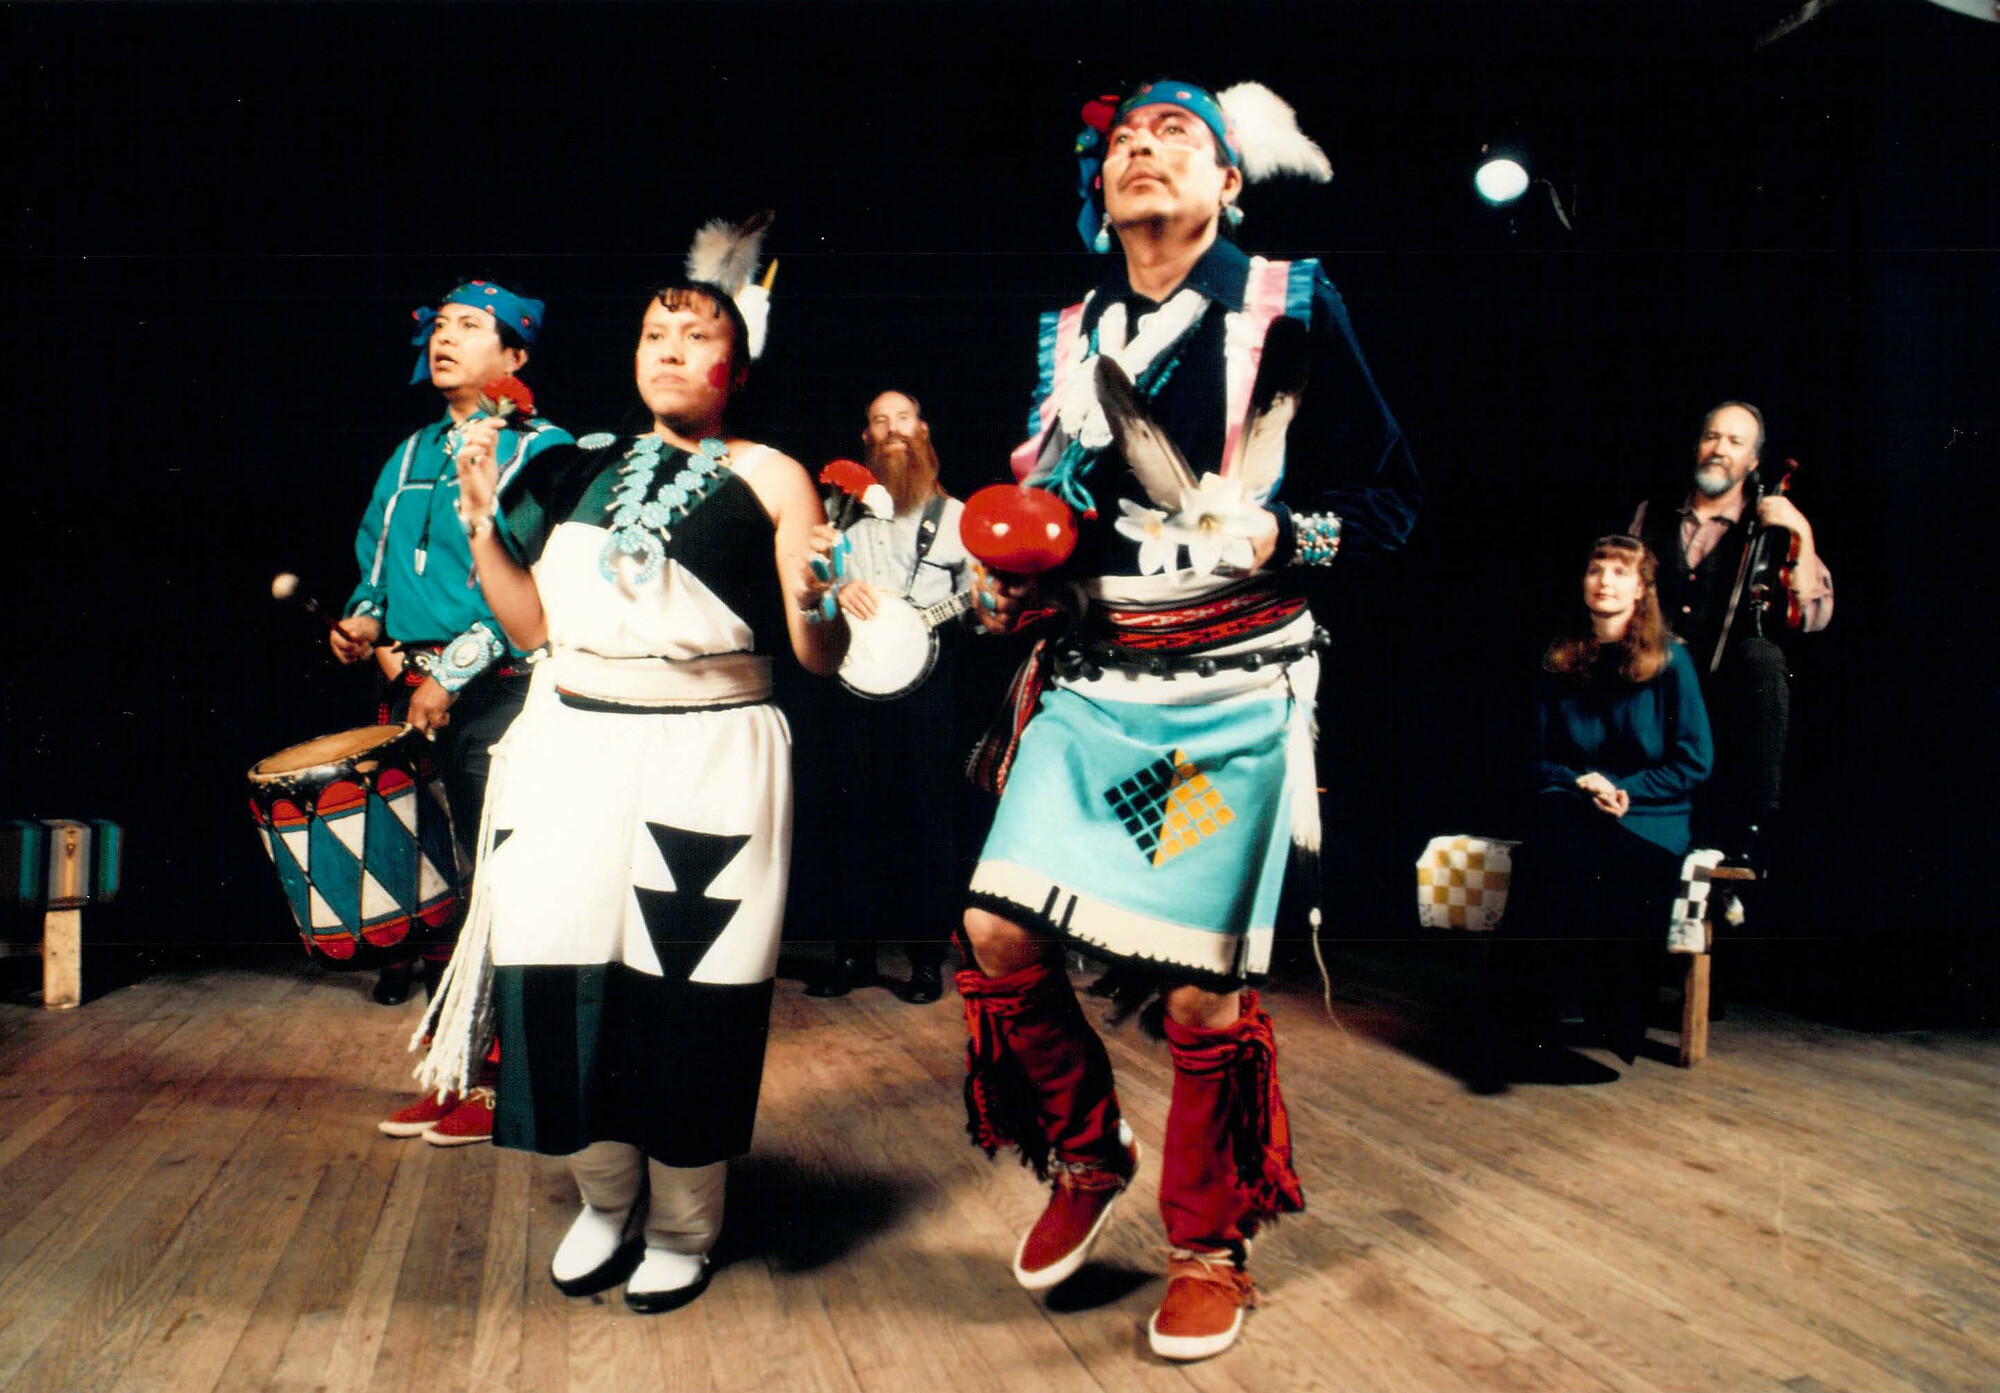 three performers in traditional Native American costume